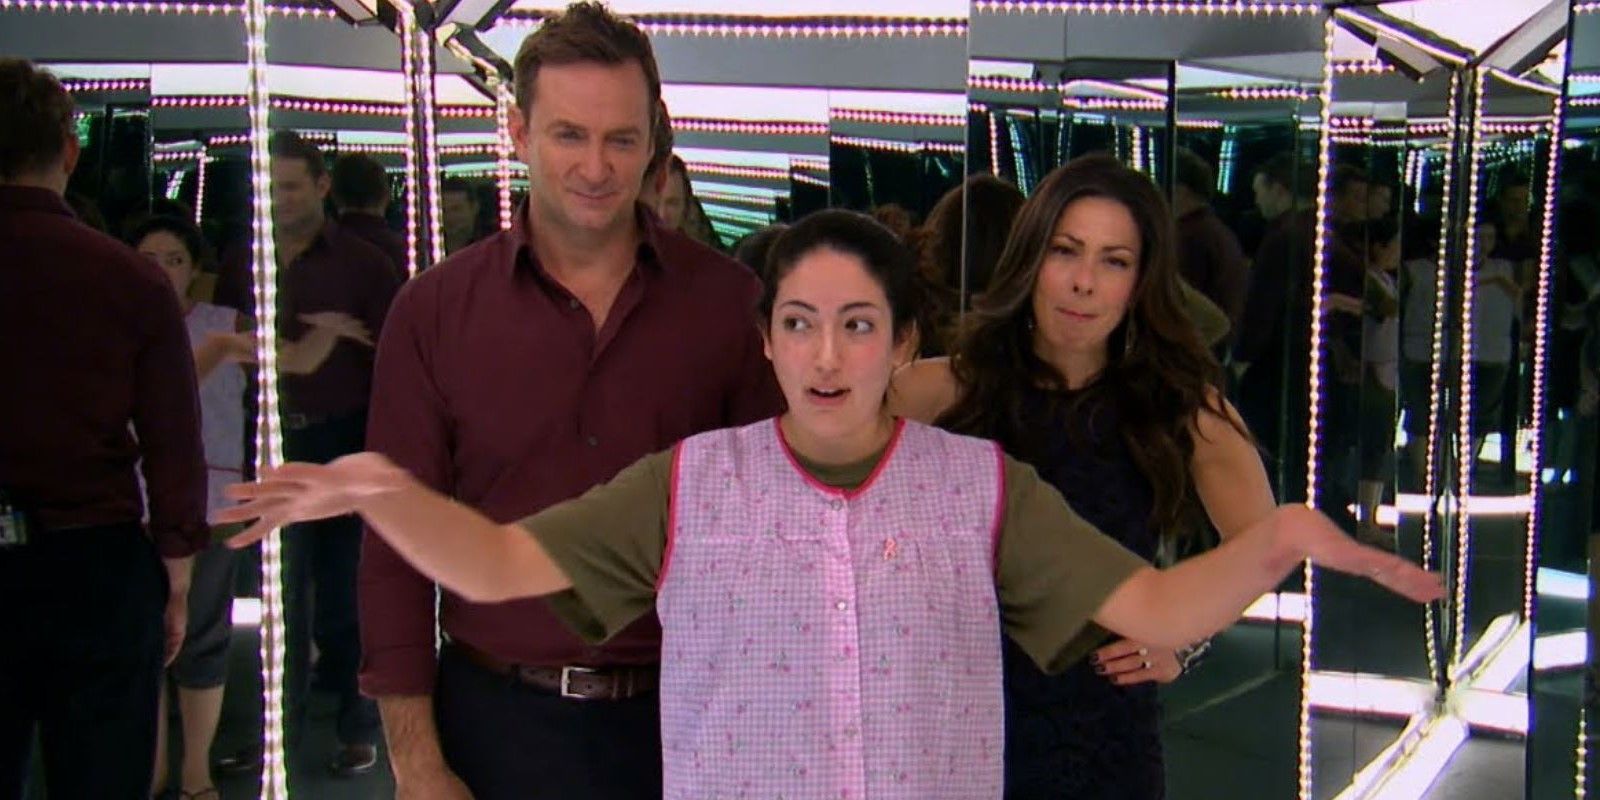 A scene from What Not to Wear featuring Stacy London and Clinton Kelly and a guest